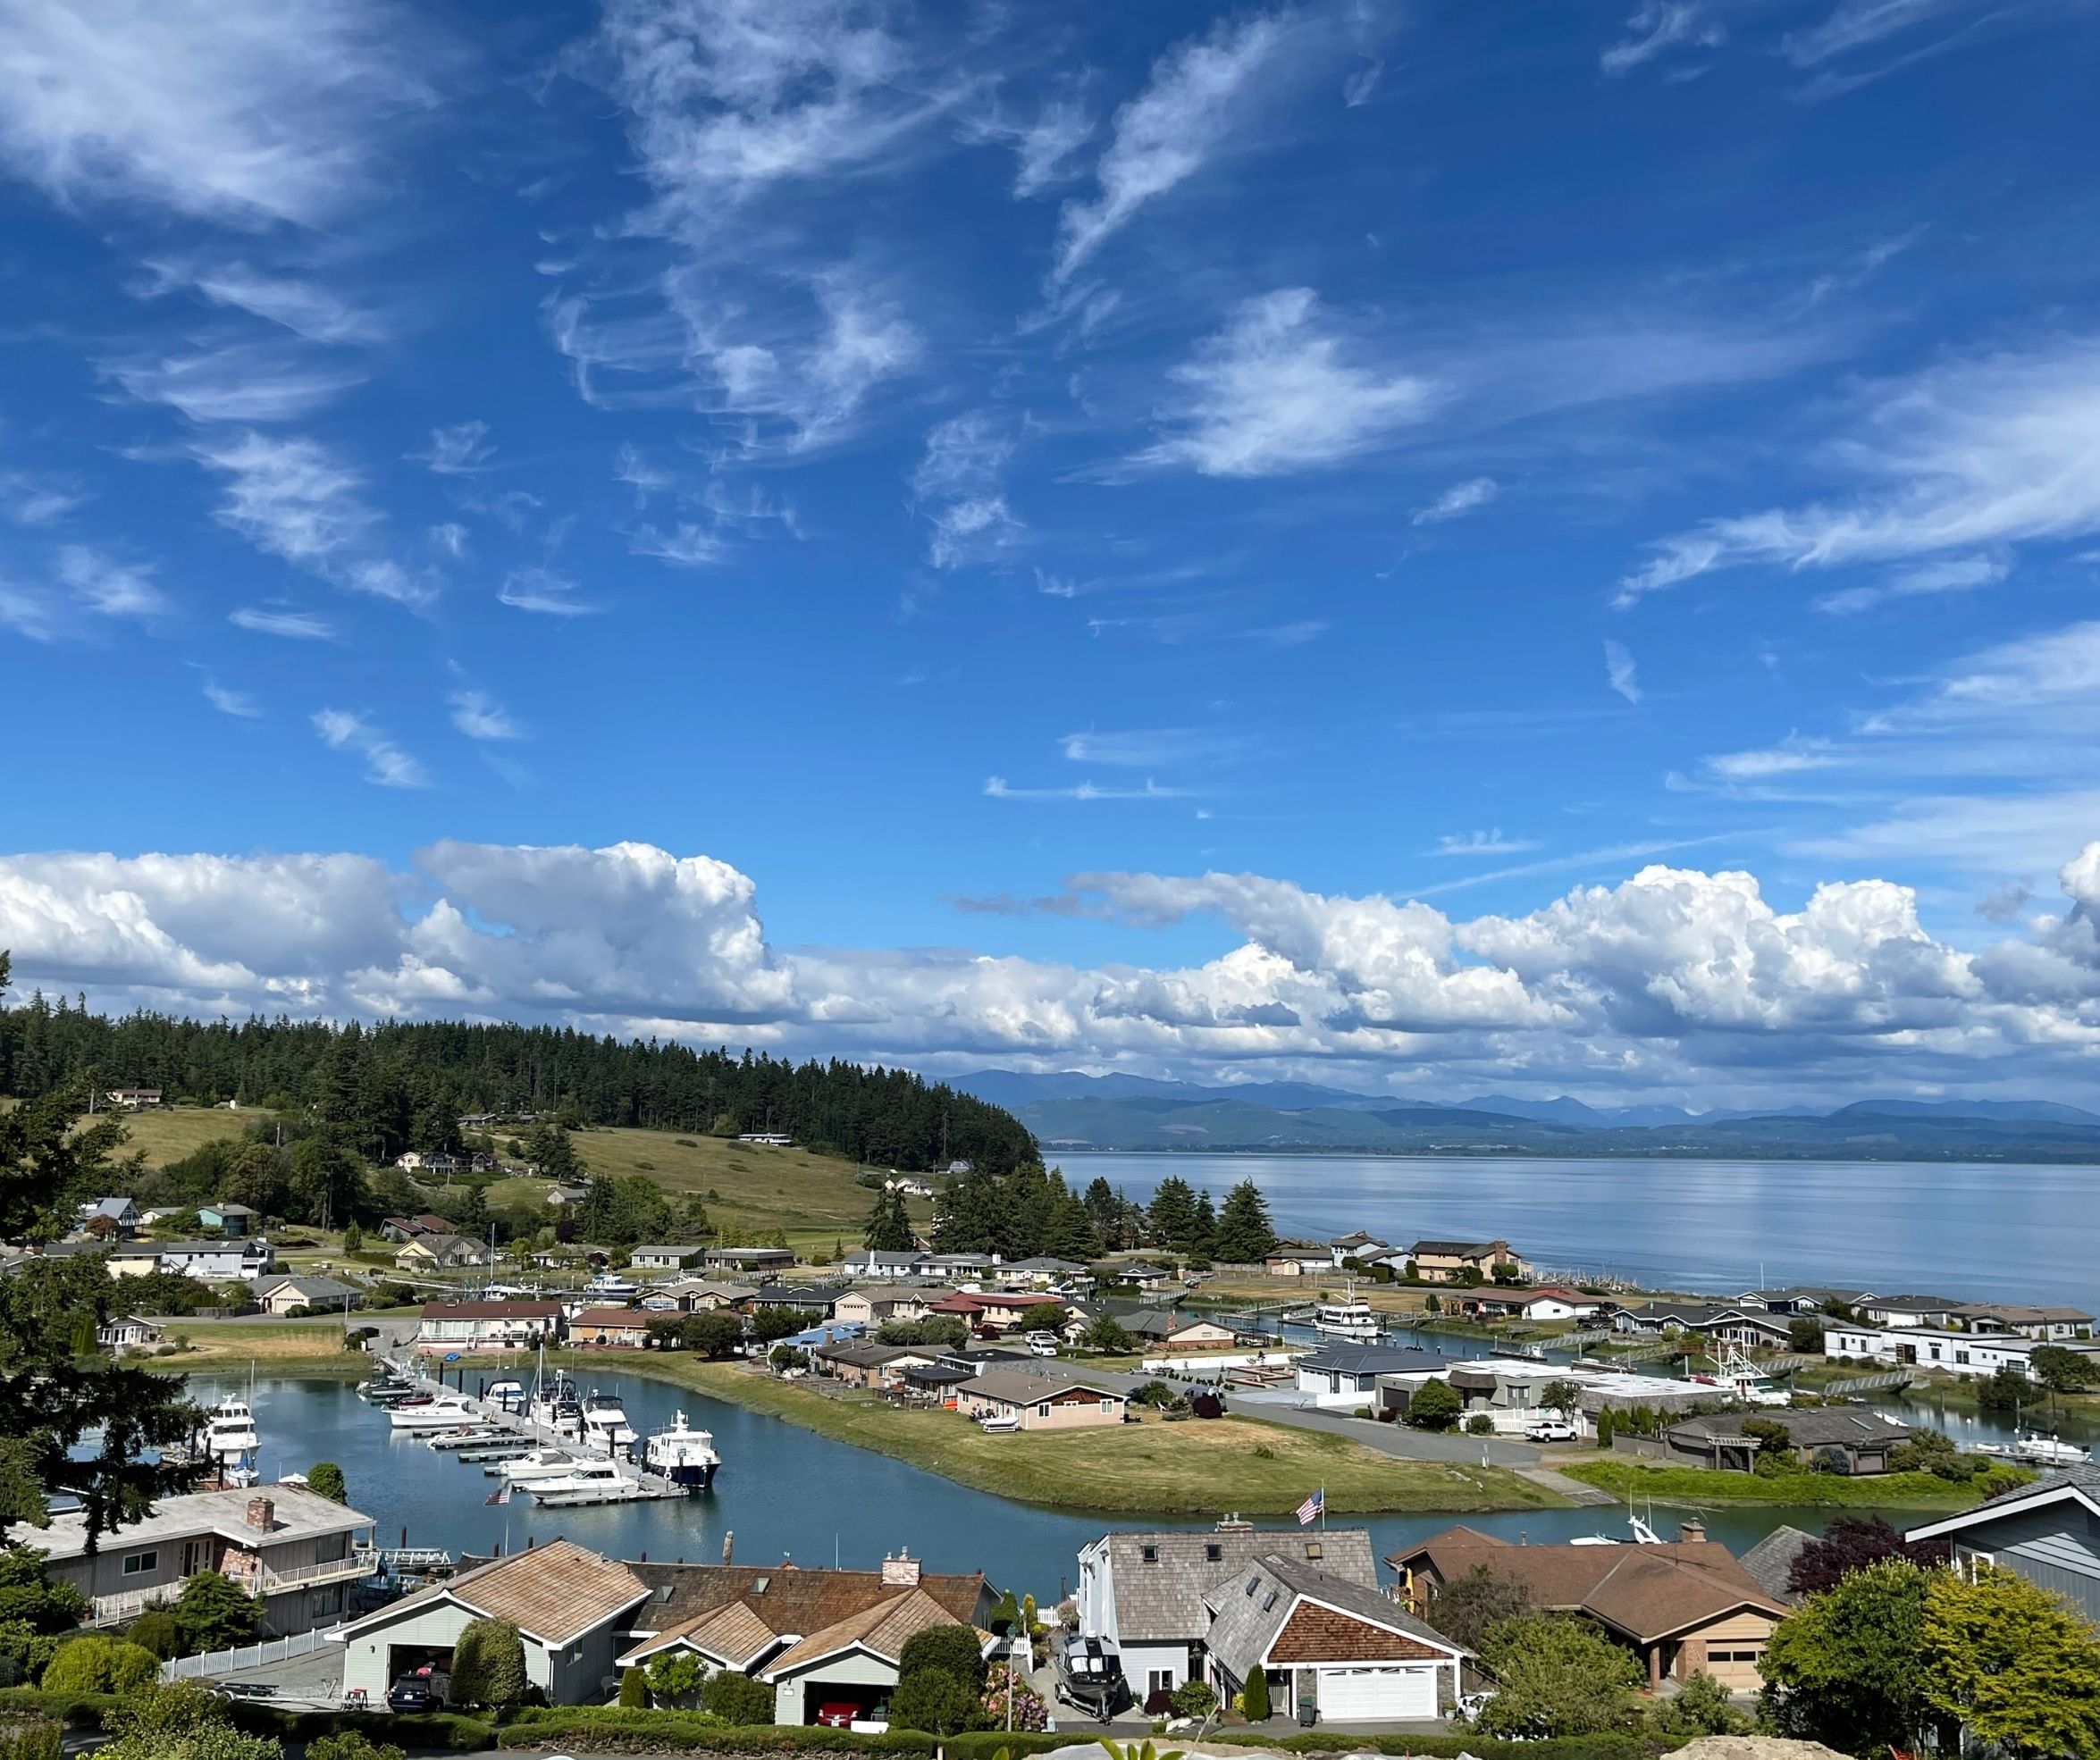 Mariners Cove, Whidbey Island, Washington, neighborhood, PNW, island, lifestyle, Homes on Whidbey, Ocean front homes, dock your boat